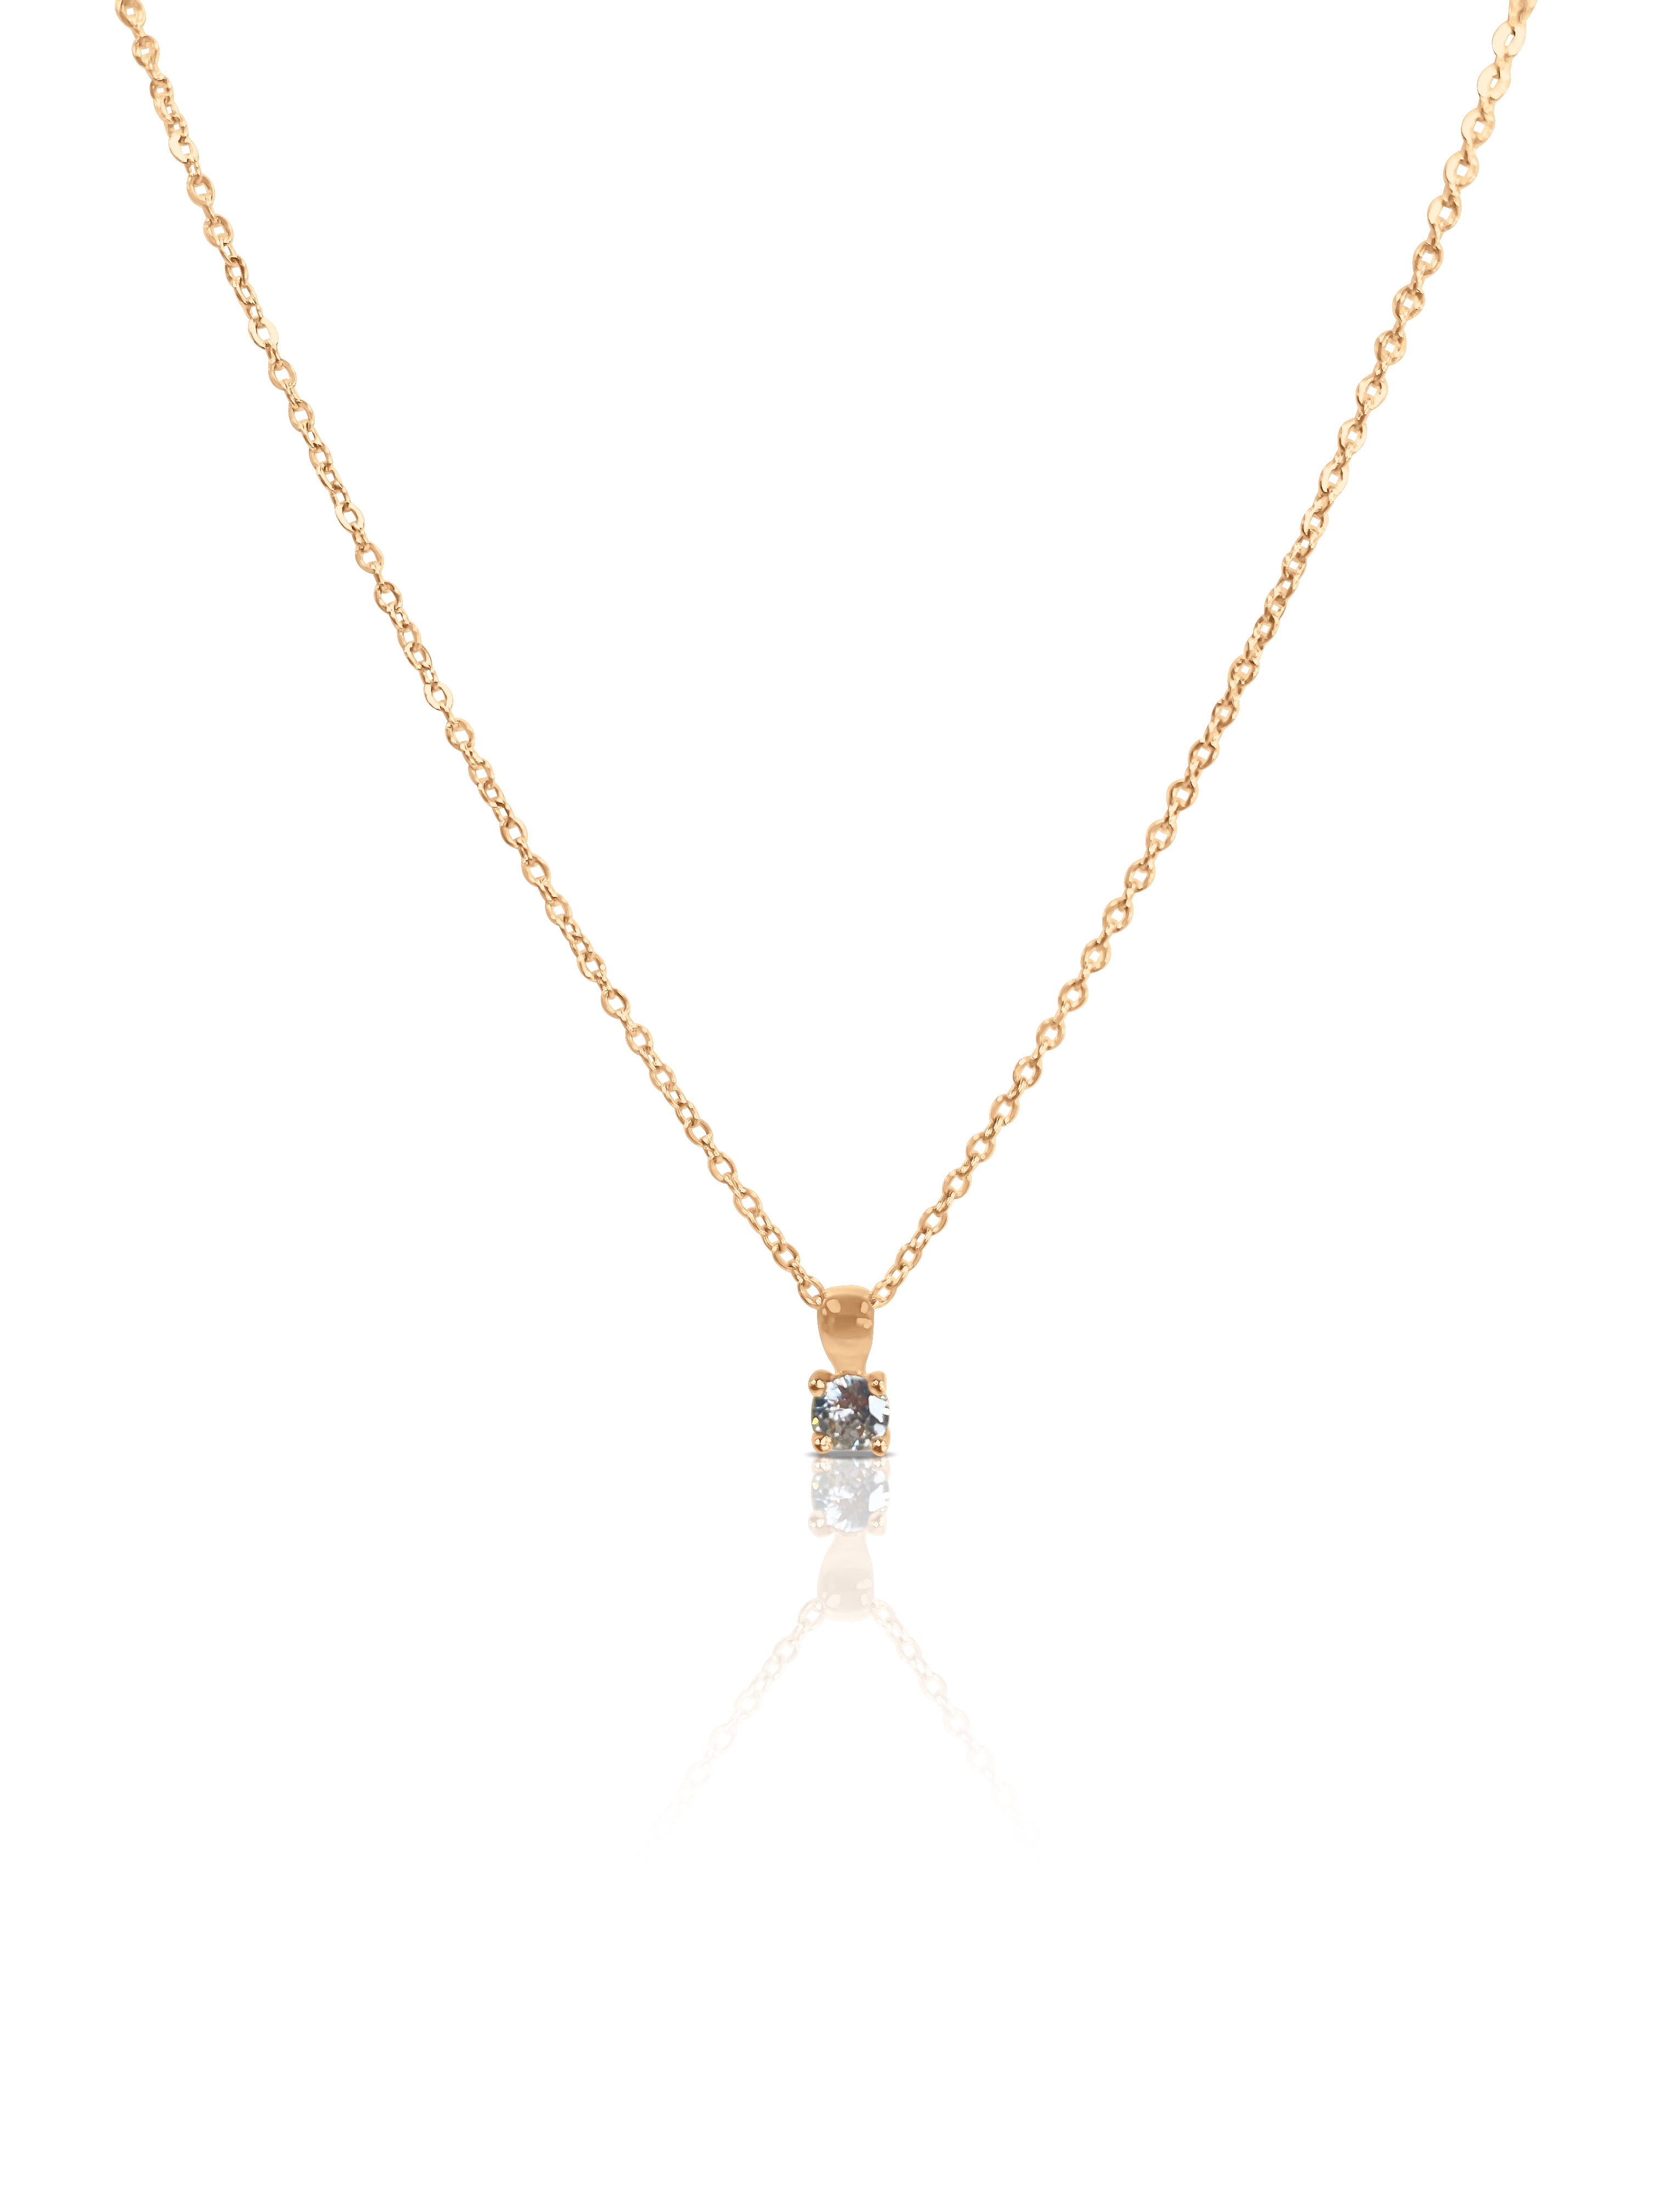 SALE - Leah Small Birthstone Necklace